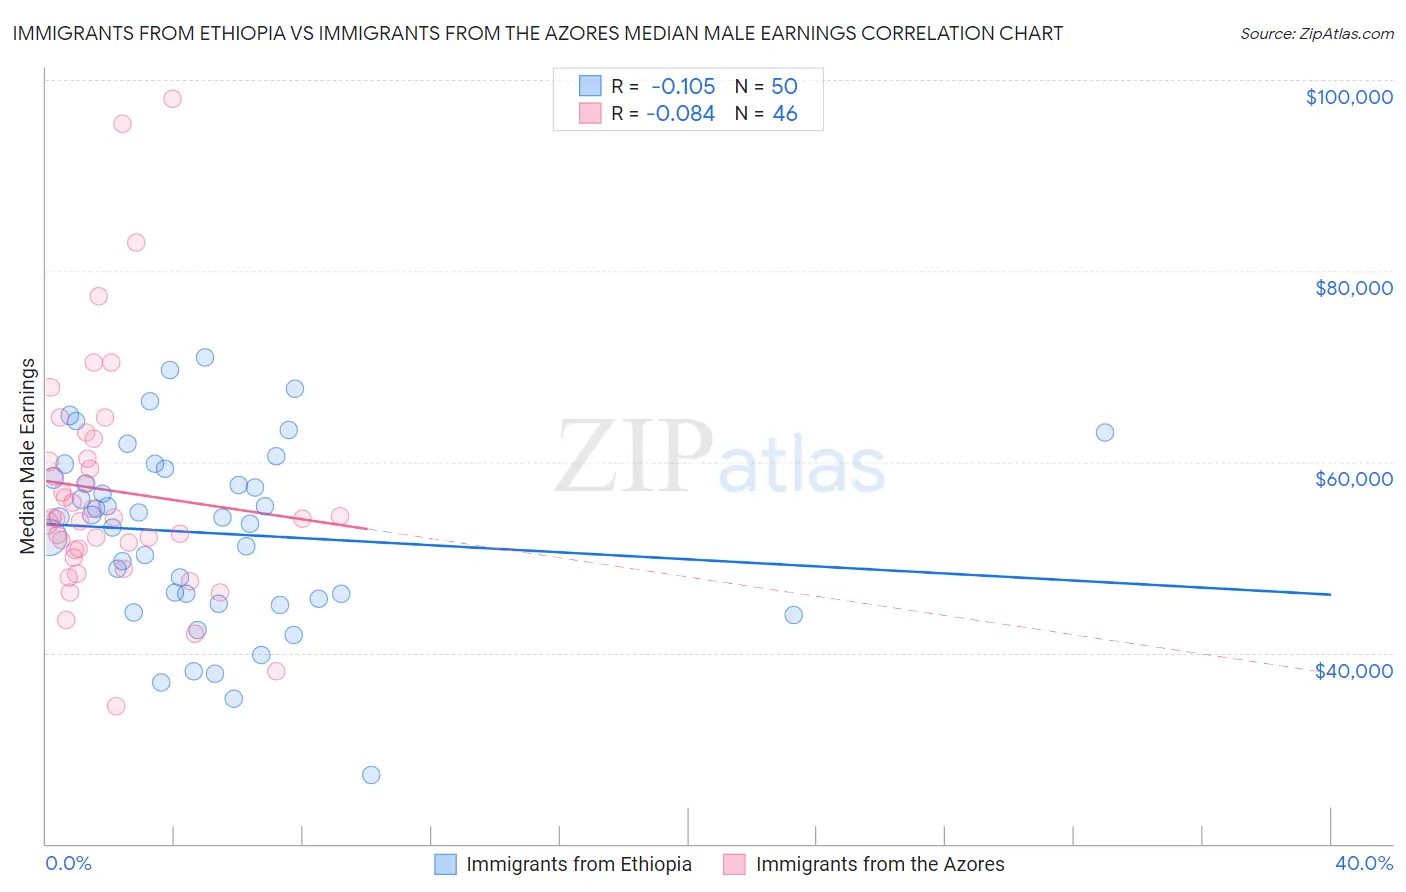 Immigrants from Ethiopia vs Immigrants from the Azores Median Male Earnings